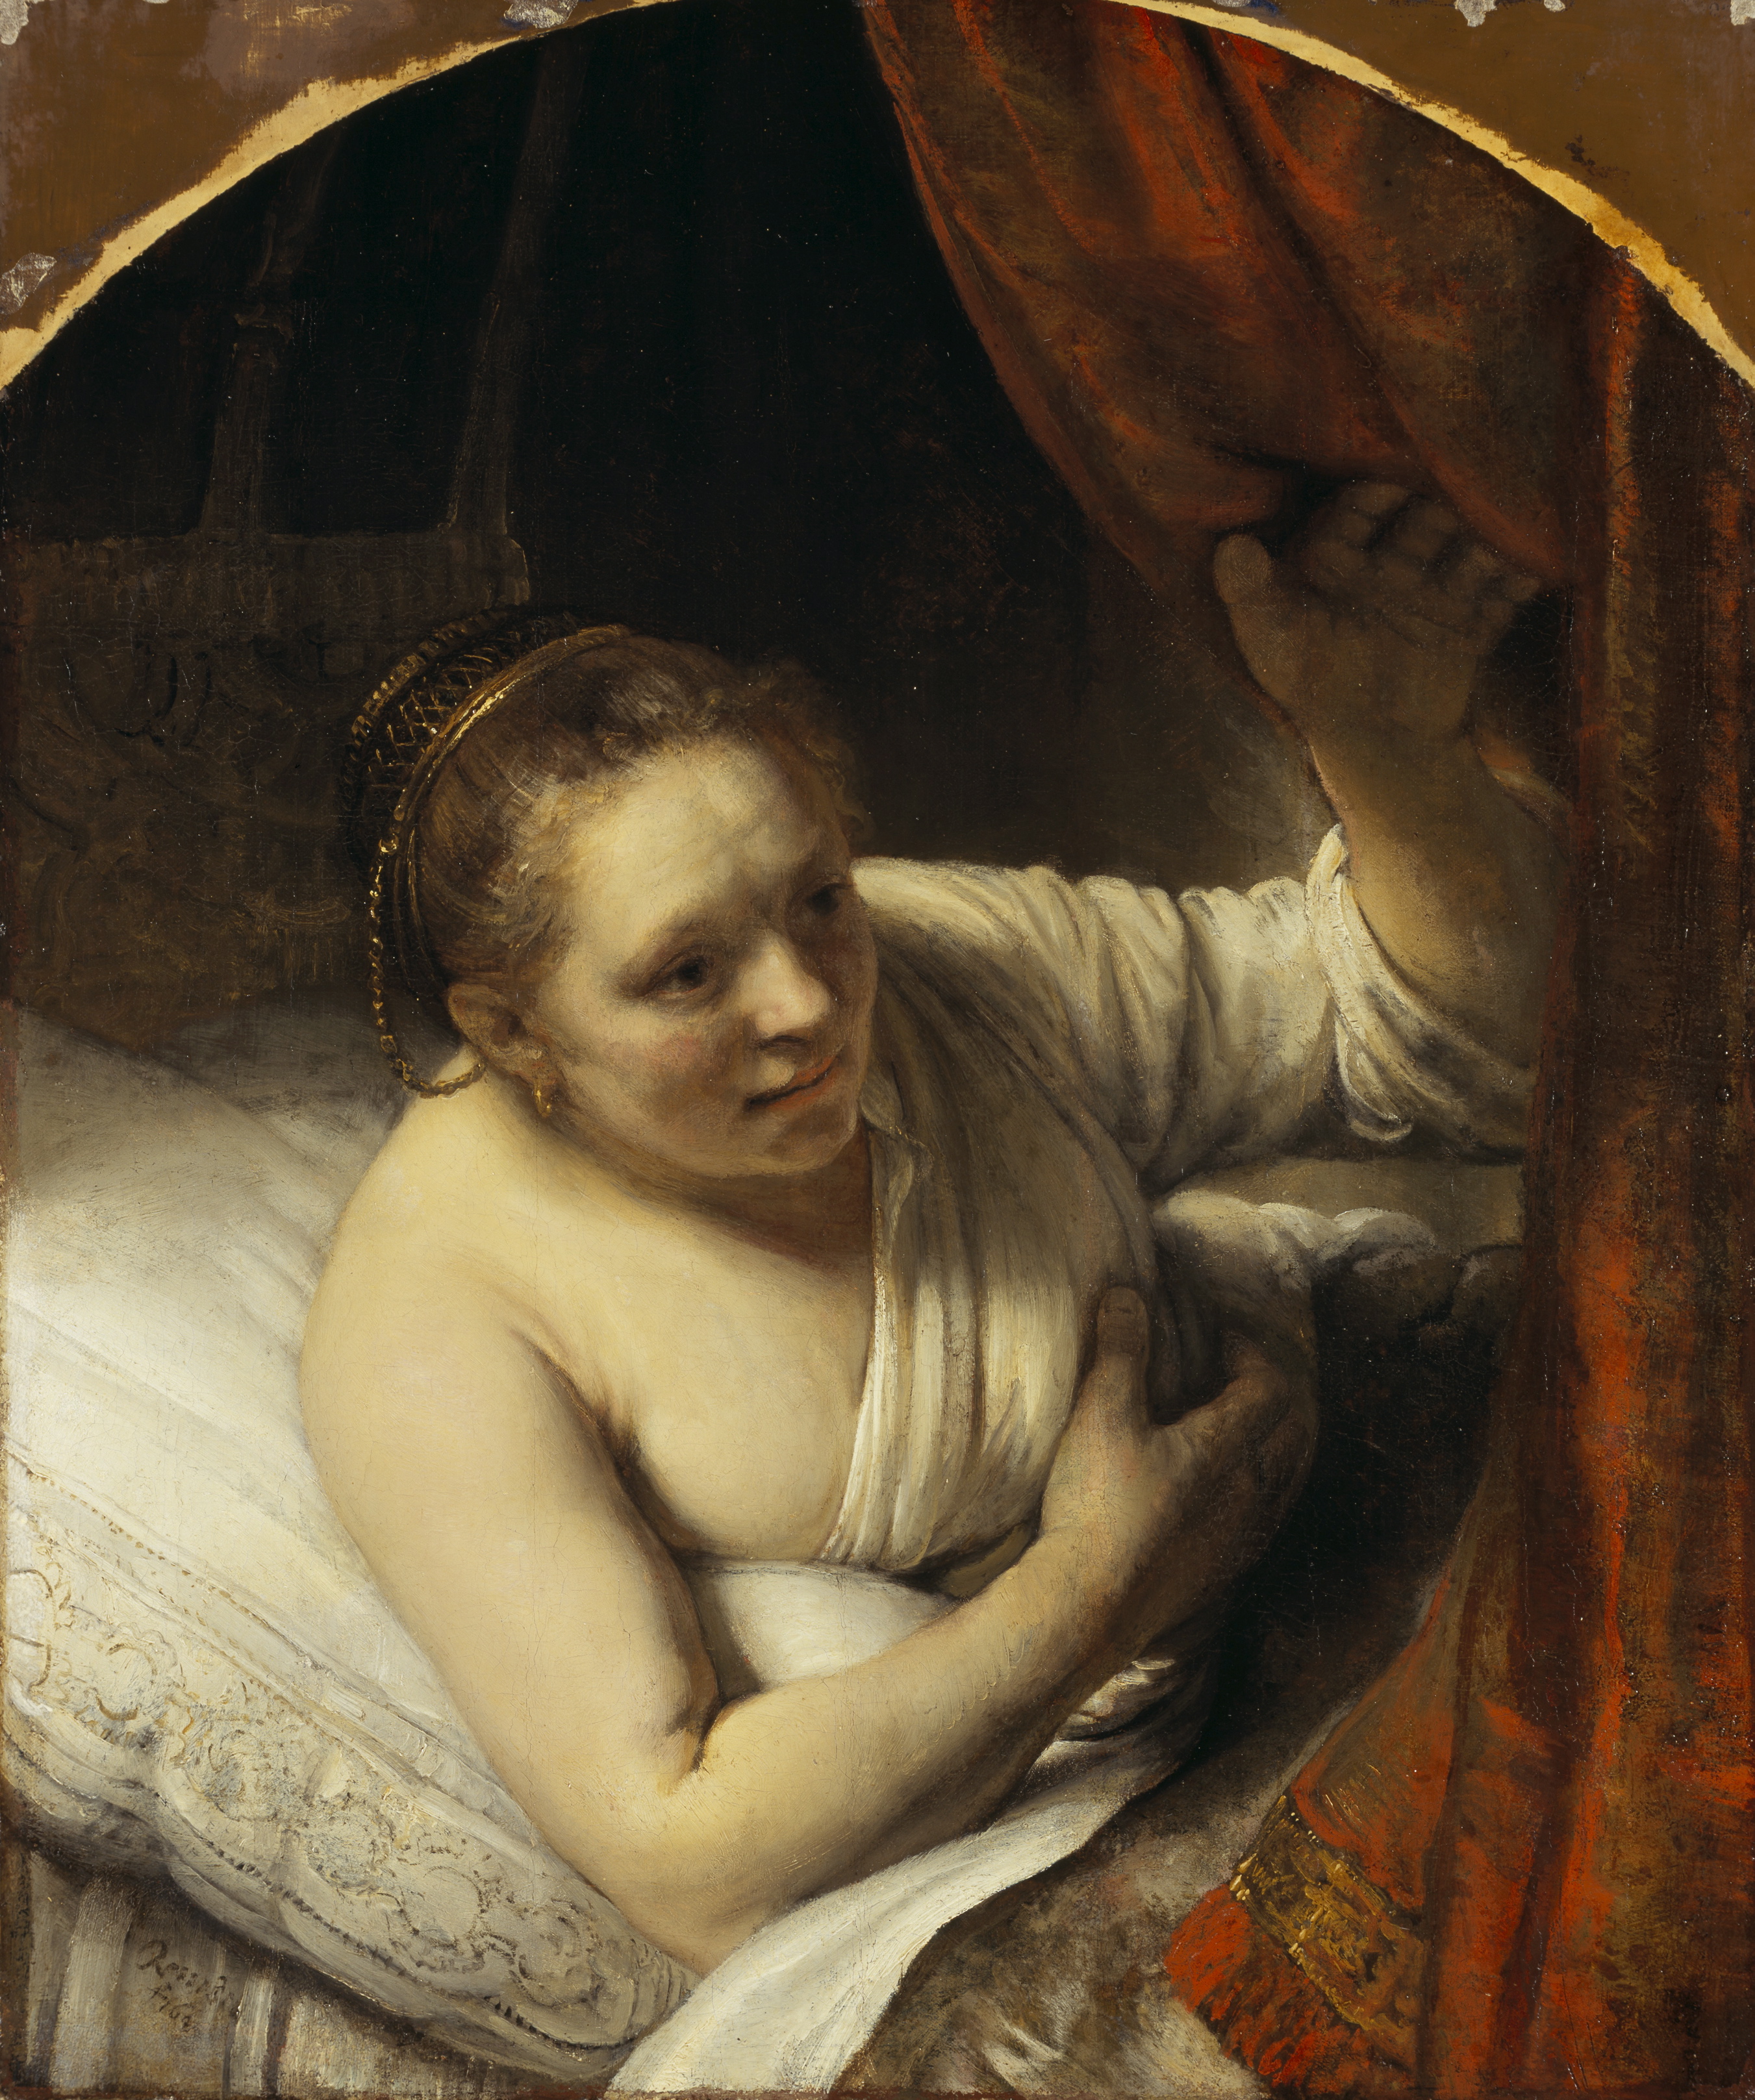 Rembrandt van Rijn A woman in bed 164(7?) oil on canvas 81.4 x 67.9 cm Scottish National Gallery, Edinburgh © Trustees of the National Galleries of Scotland ***This image may only be used in conjunction with editorial coverage of The Greats exhibition, 24 Oct 2015 - 14 Feb 2016, at the Art Gallery of New South Wales. This image may not be cropped or overwritten. Prior approval in writing required for use as a cover. Caption details must accompany reproduction of the image. *** Media contact: Lisa.Catt@ag.nsw.gov.au *** Local Caption *** ***This image may only be used in conjunction with editorial coverage of The Greats exhibition, 24 Oct 2015 - 14 Feb 2016, at the Art Gallery of New South Wales. This image may not be cropped or overwritten. Prior approval in writing required for use as a cover. Caption details must accompany reproduction of the image. *** Media contact: Lisa.Catt@ag.nsw.gov.au